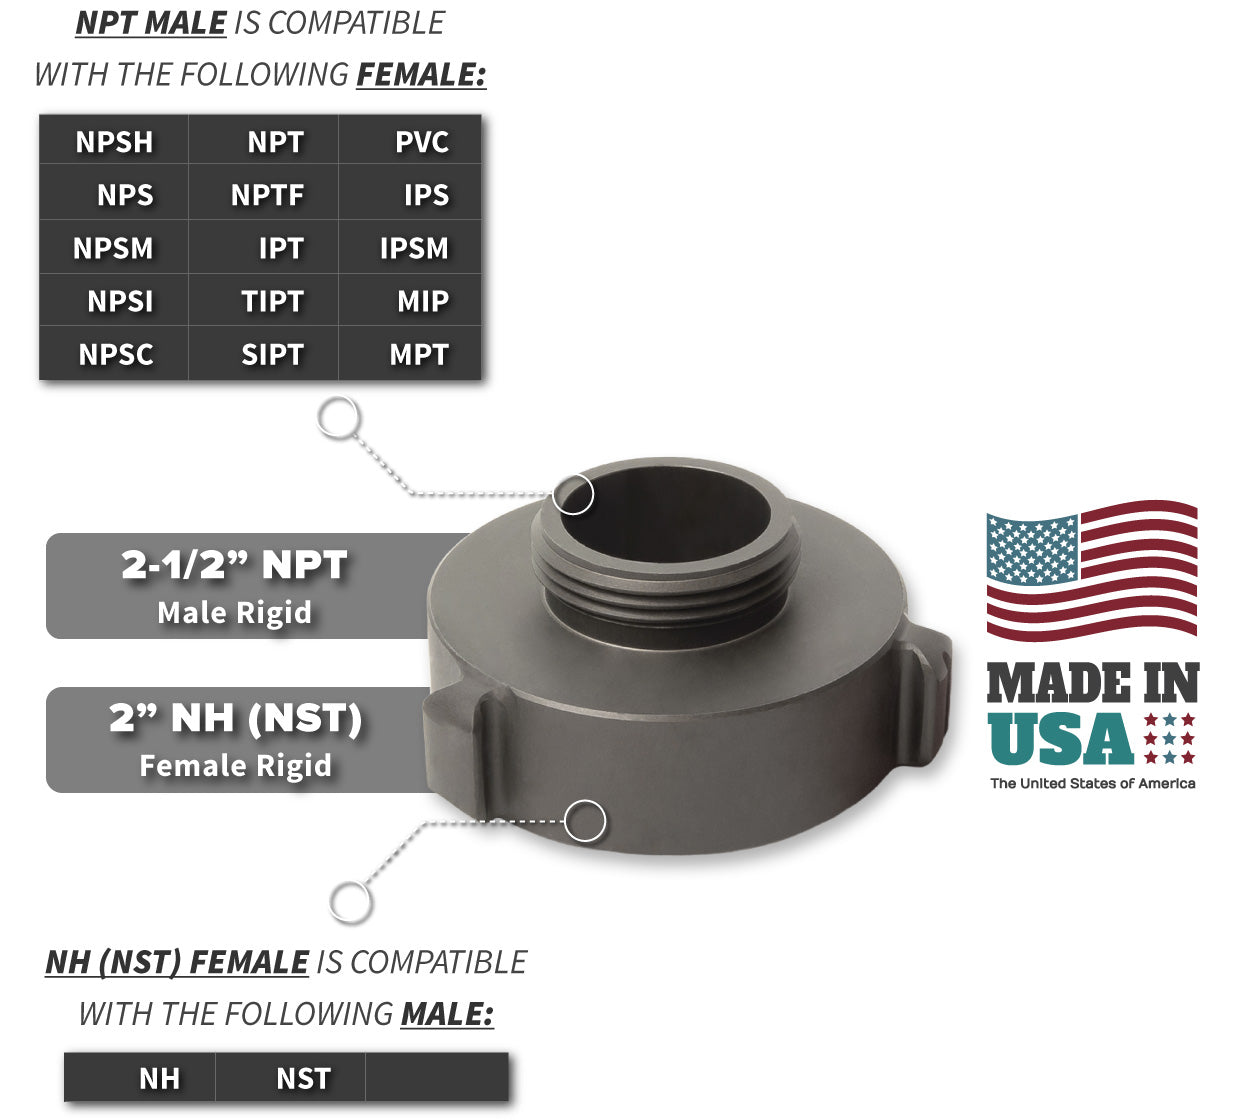 2 Inch NH-NST Female x 2.5 Inch NPT Male Compatibility Thread Chart